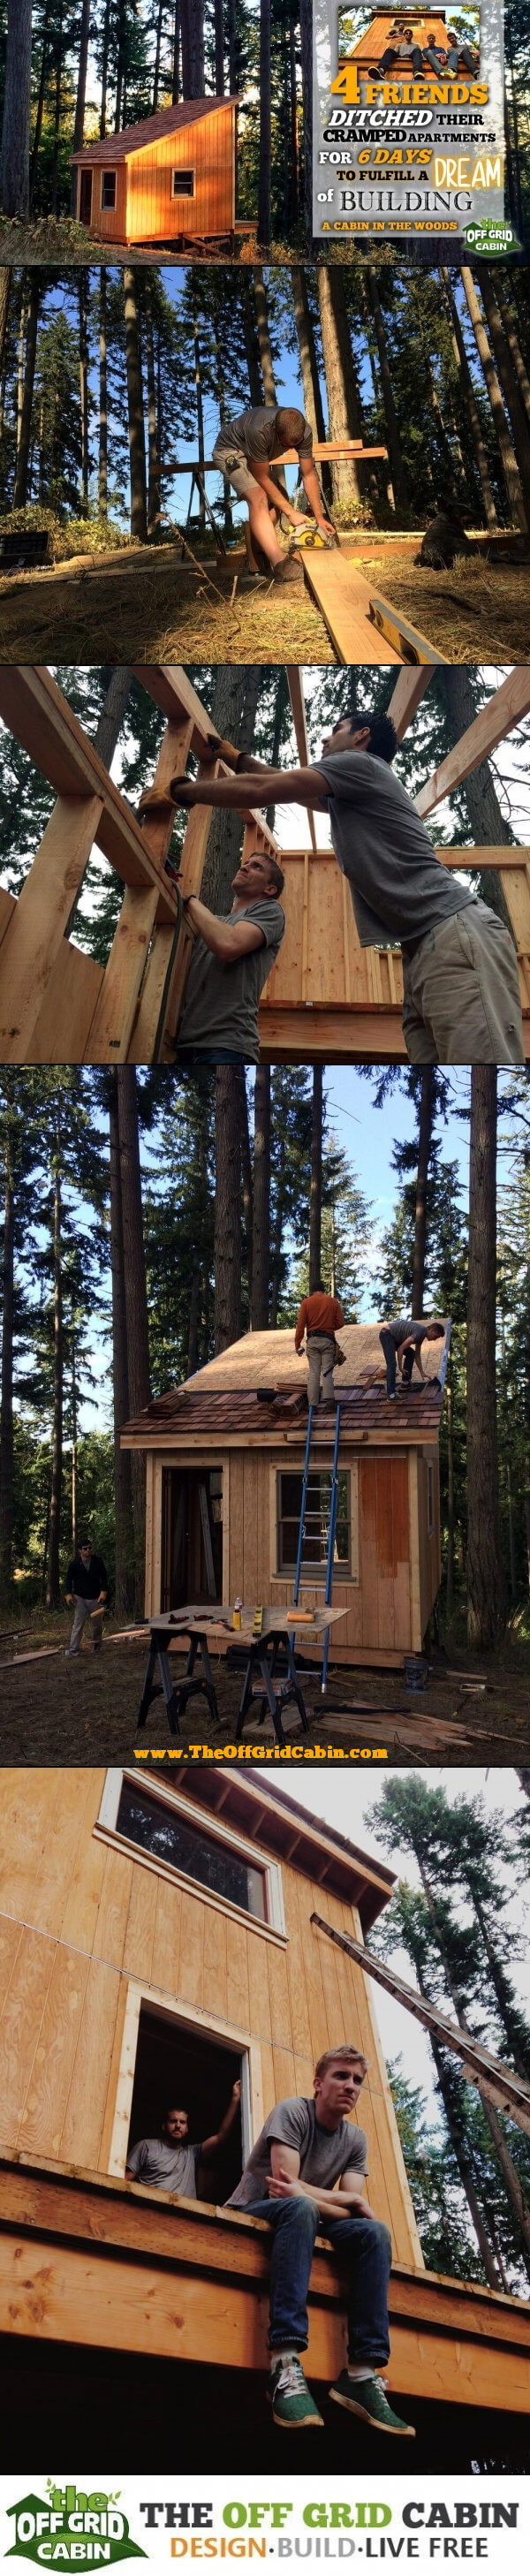 The 6 Day Cabin Build Pinterest Image